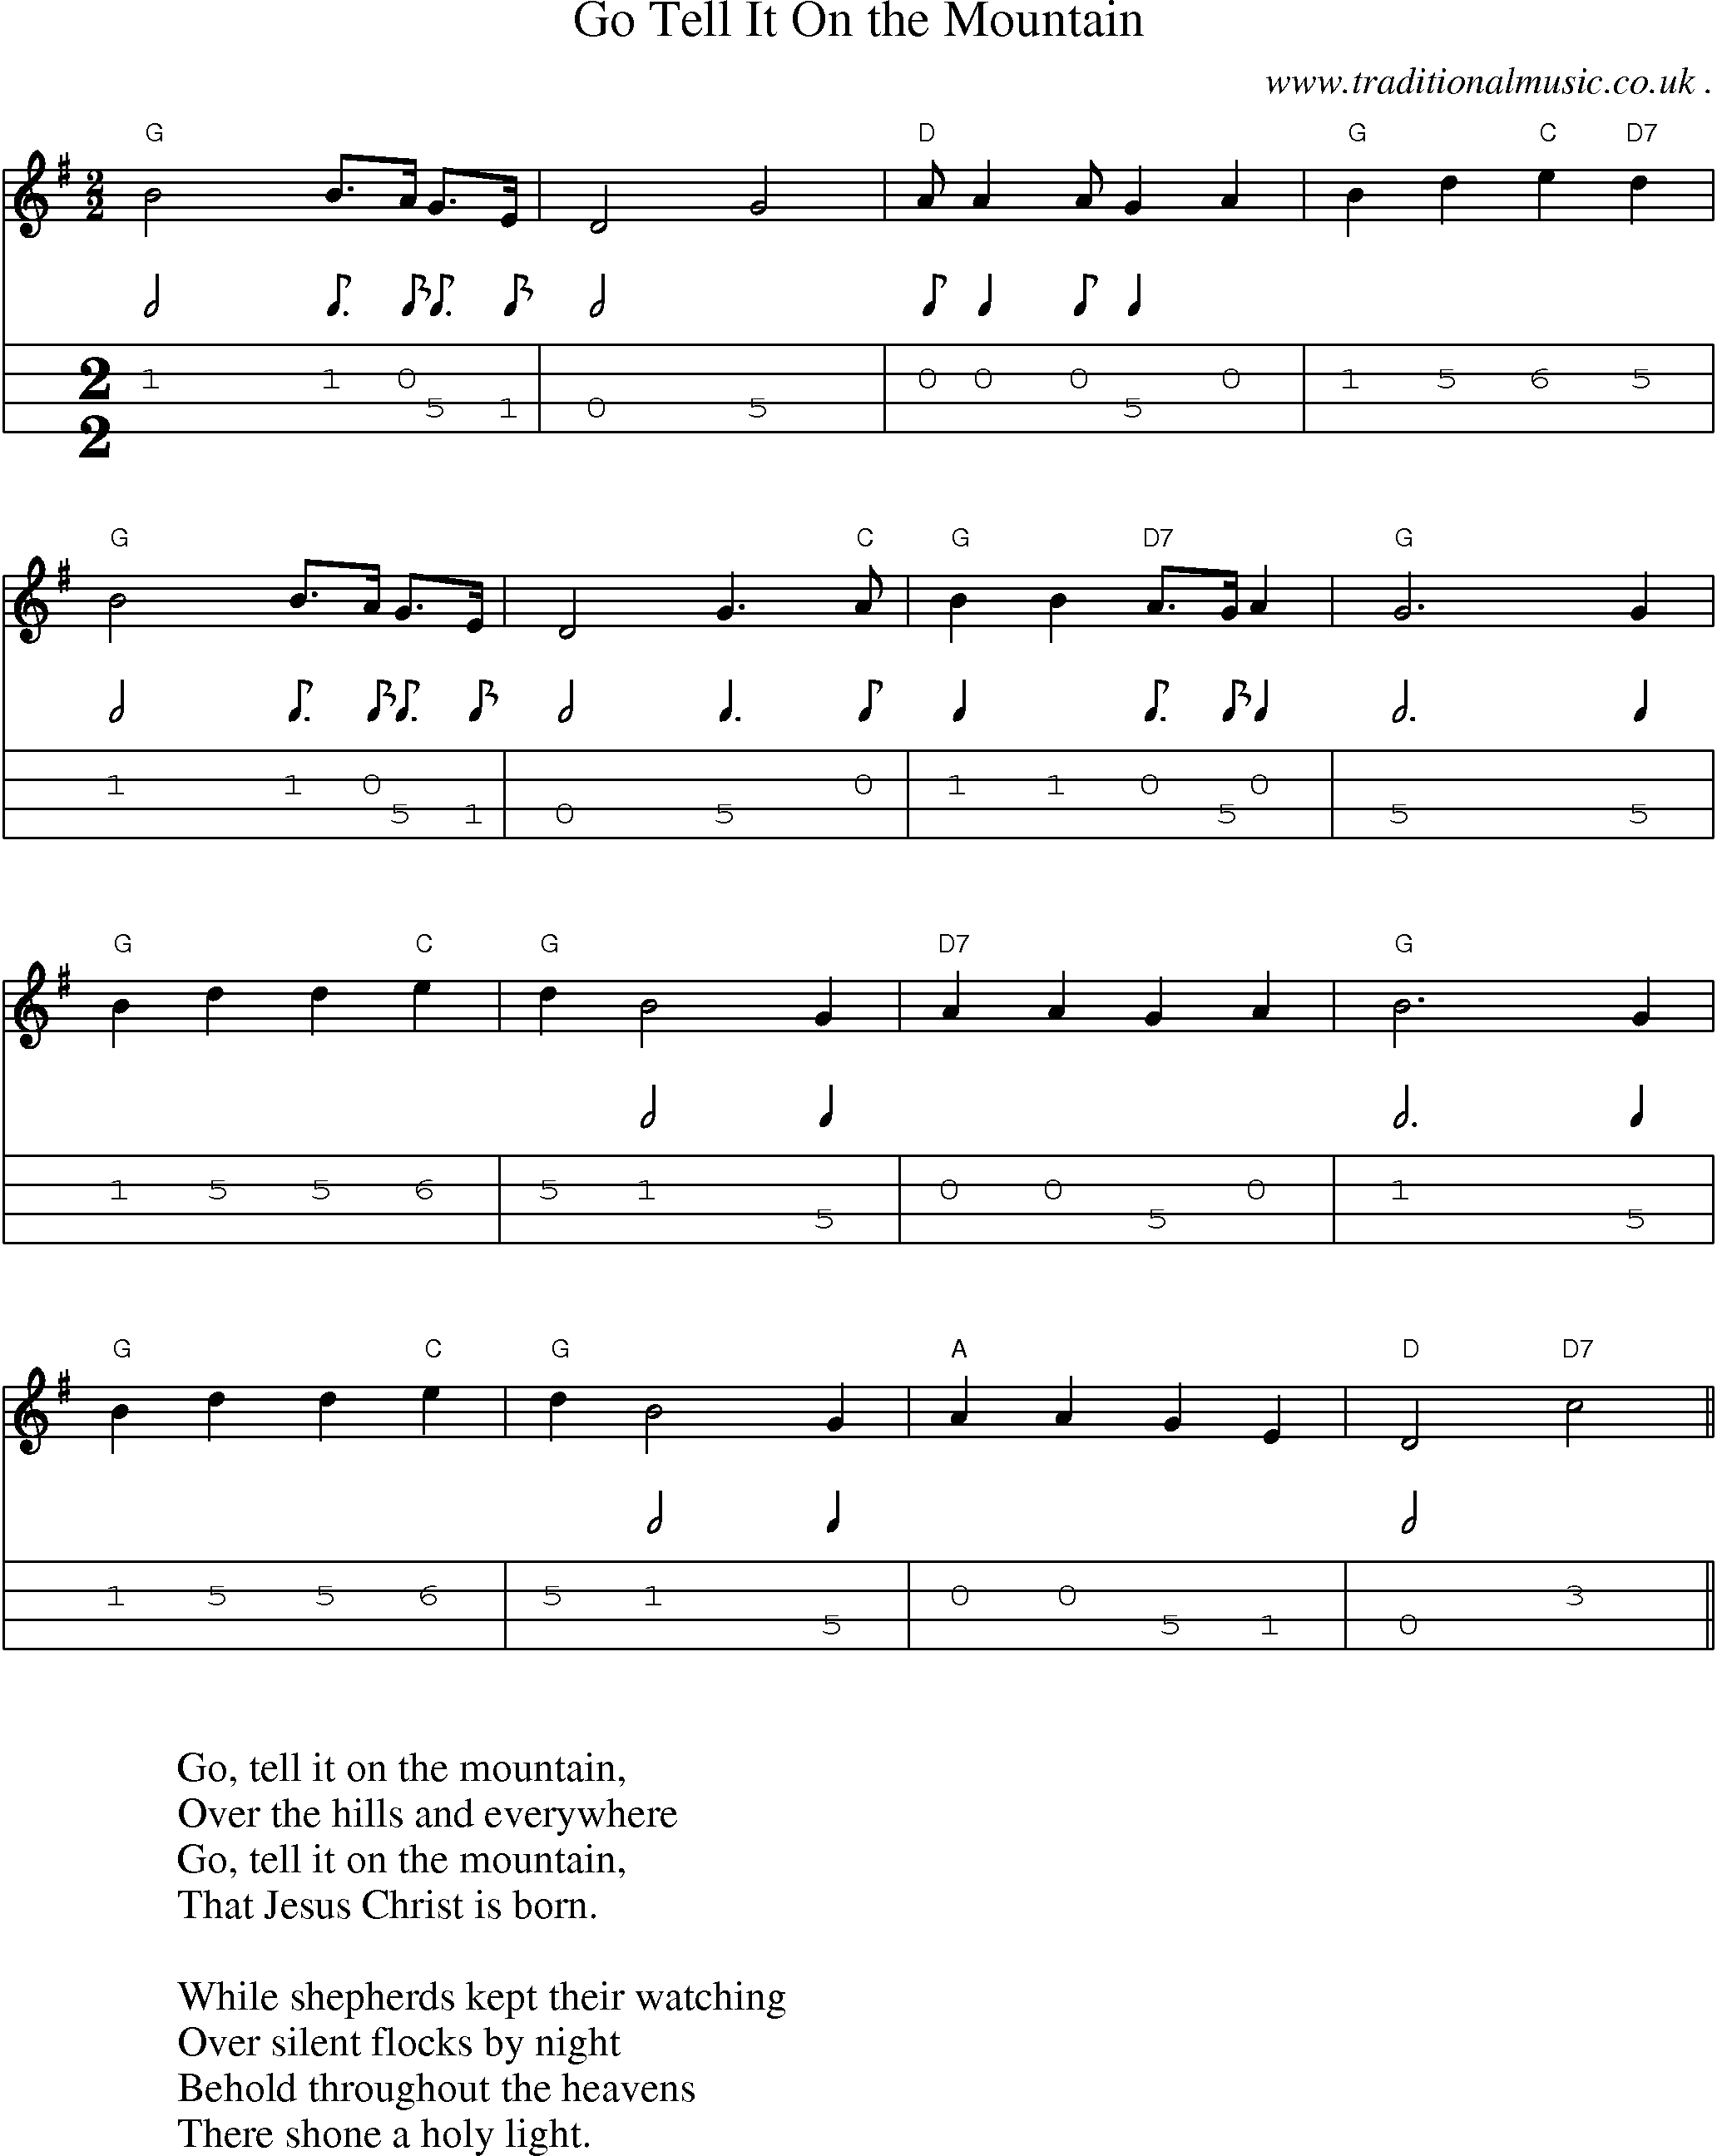 Music Score and Guitar Tabs for Go Tell It On the Mountain